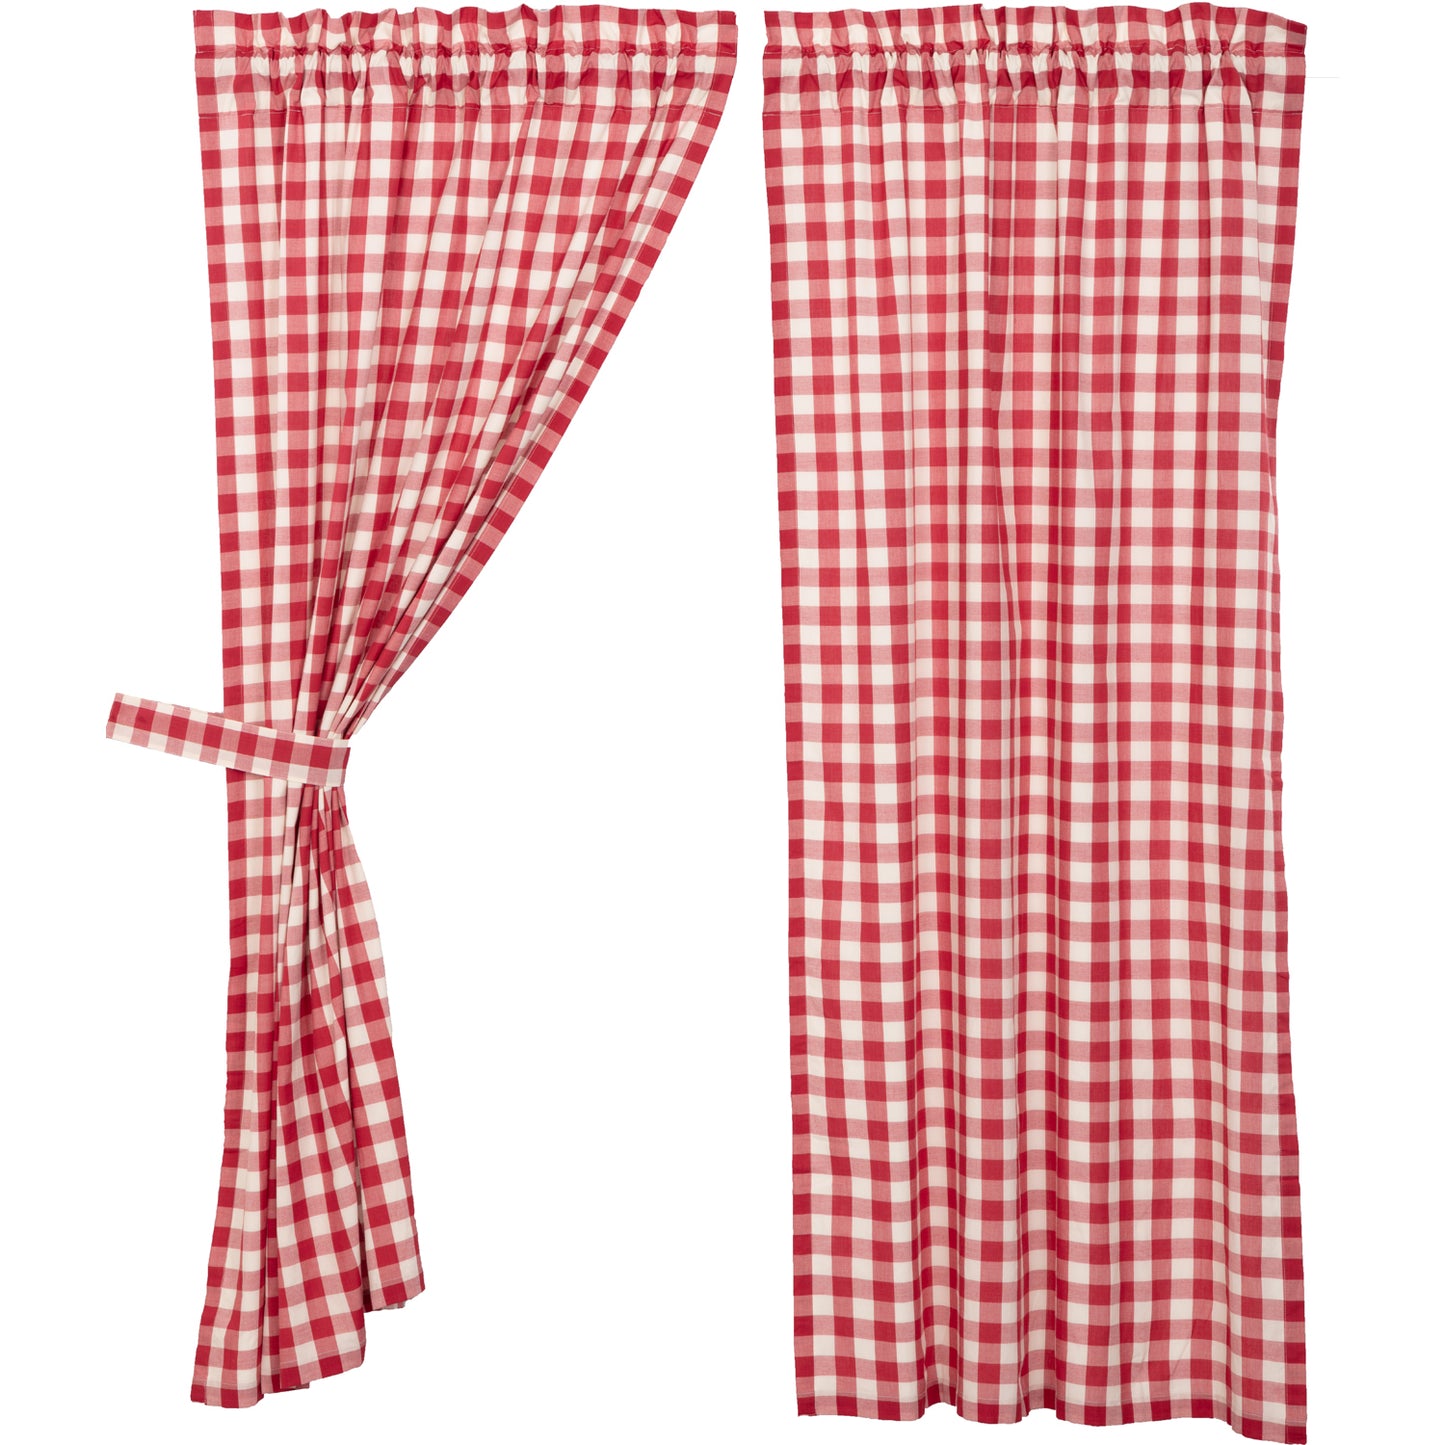 51126-Annie-Buffalo-Red-Check-Short-Panel-Set-of-2-63x36-image-6